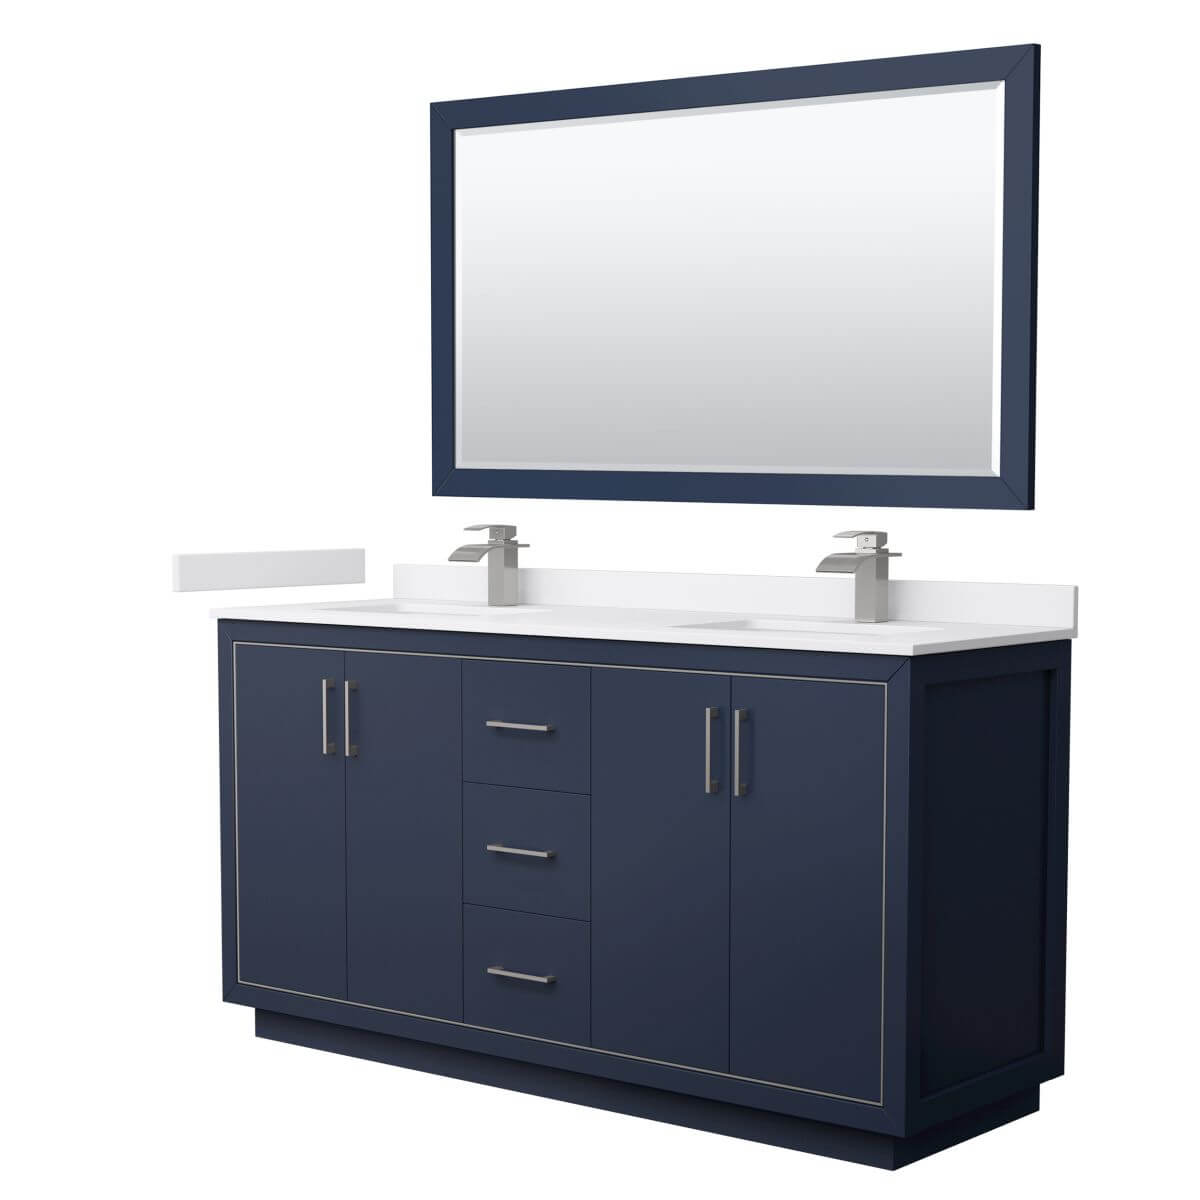 Wyndham Collection WCF111166DBNWCUNSM58 Icon 66 inch Double Bathroom Vanity in Dark Blue with White Cultured Marble Countertop, Undermount Square Sinks, Brushed Nickel Trim and 58 Inch Mirror